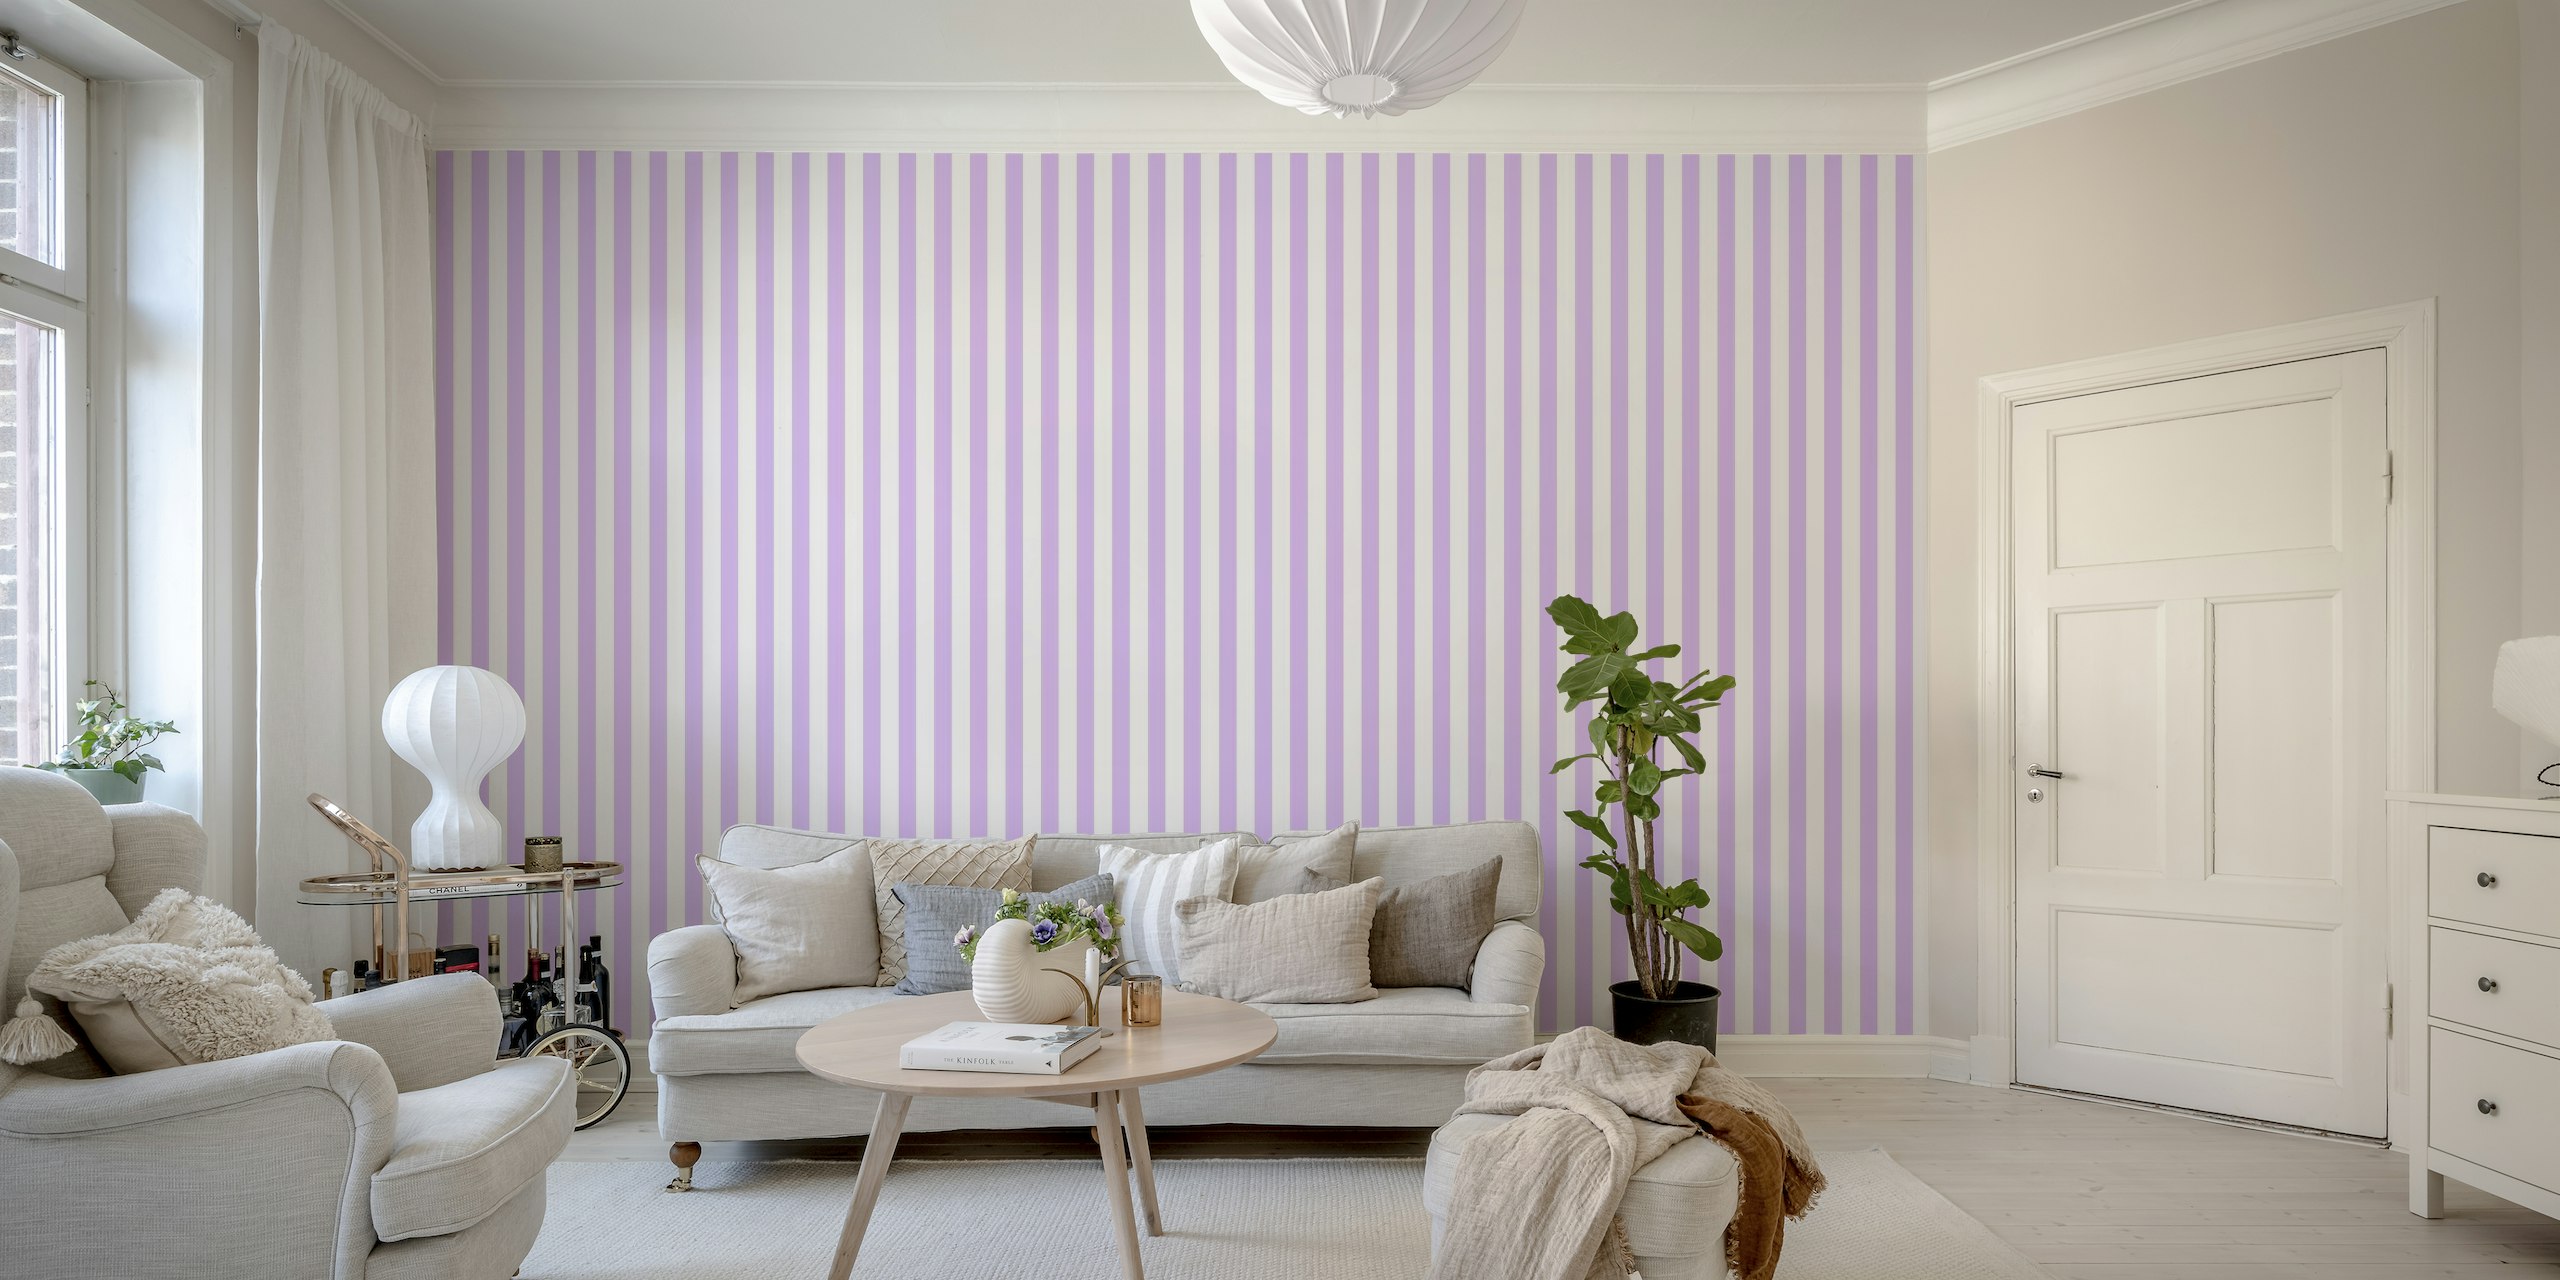 Lilac and white stripes behang